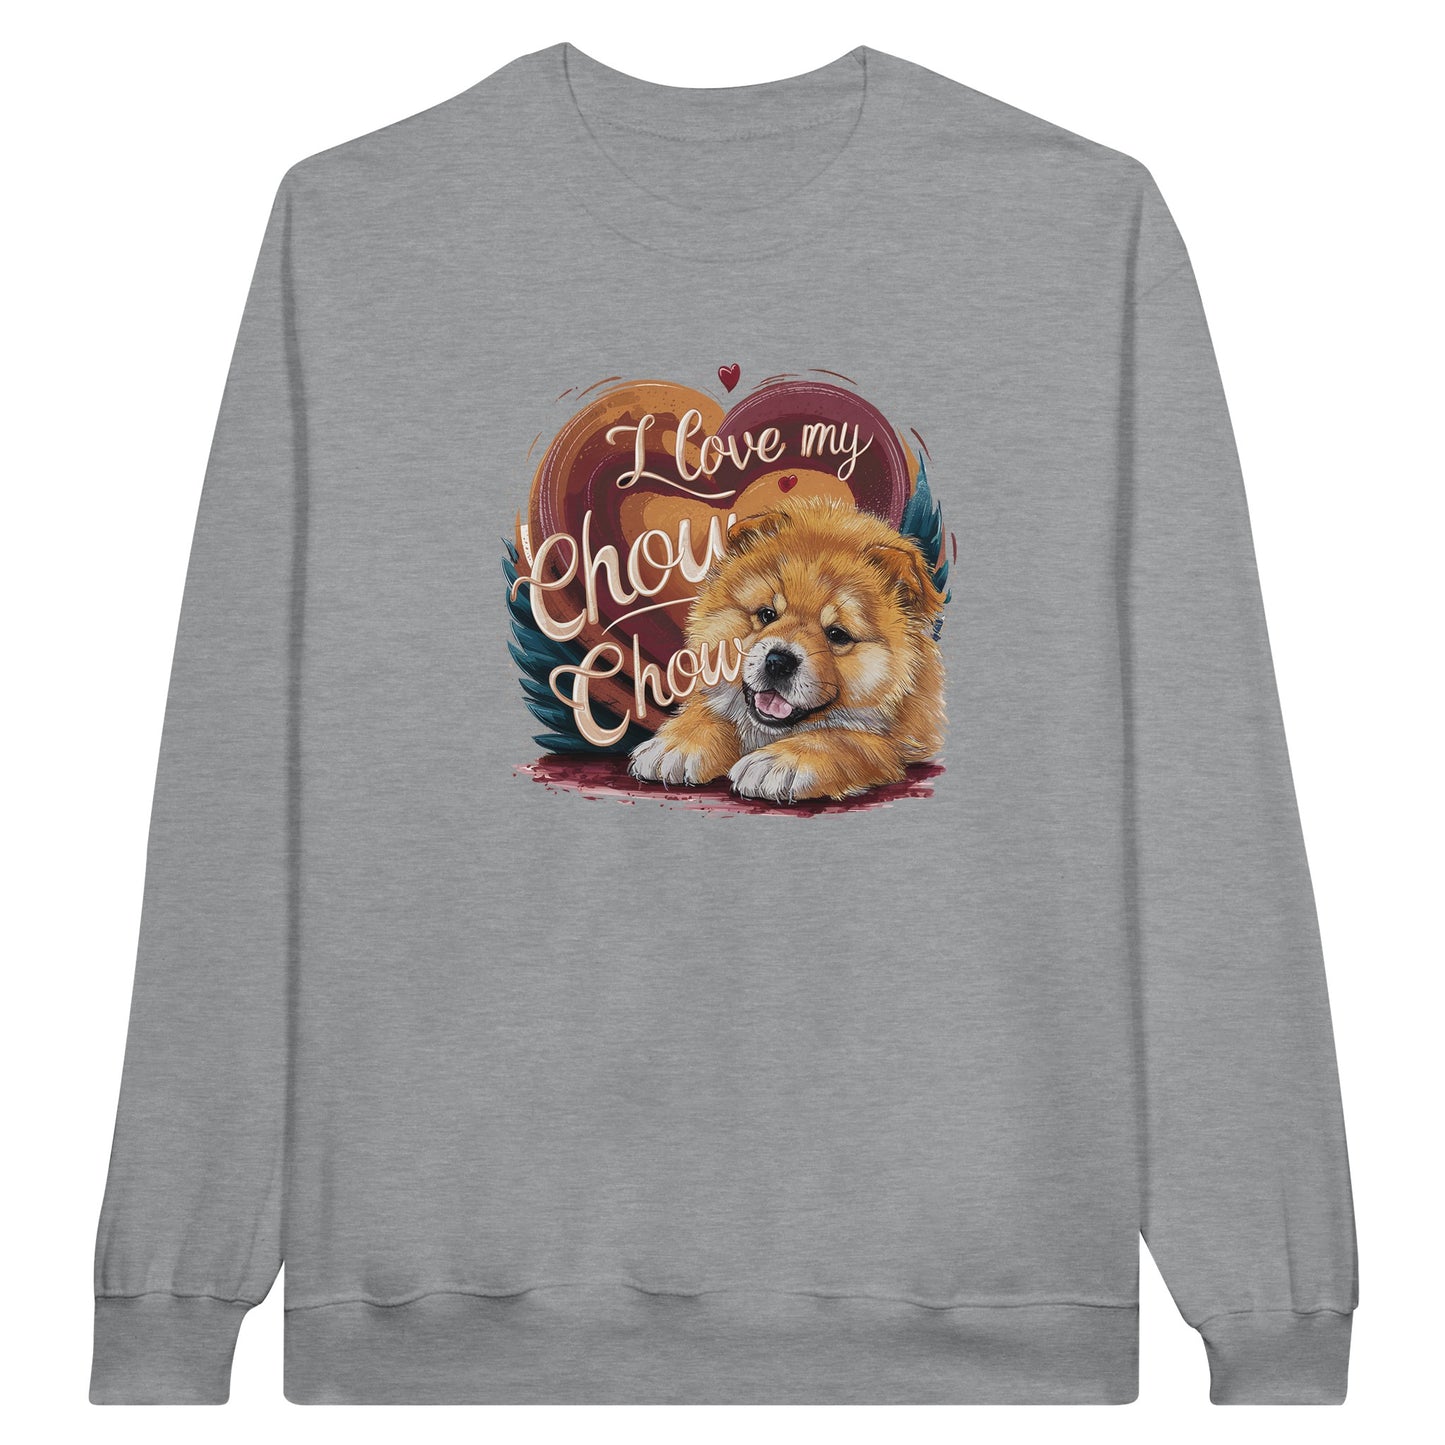 An unisex sweatshirt with a design with the phrase: "I love my Chow Chow" and a cute chow chow puppy. Shirt color is grey